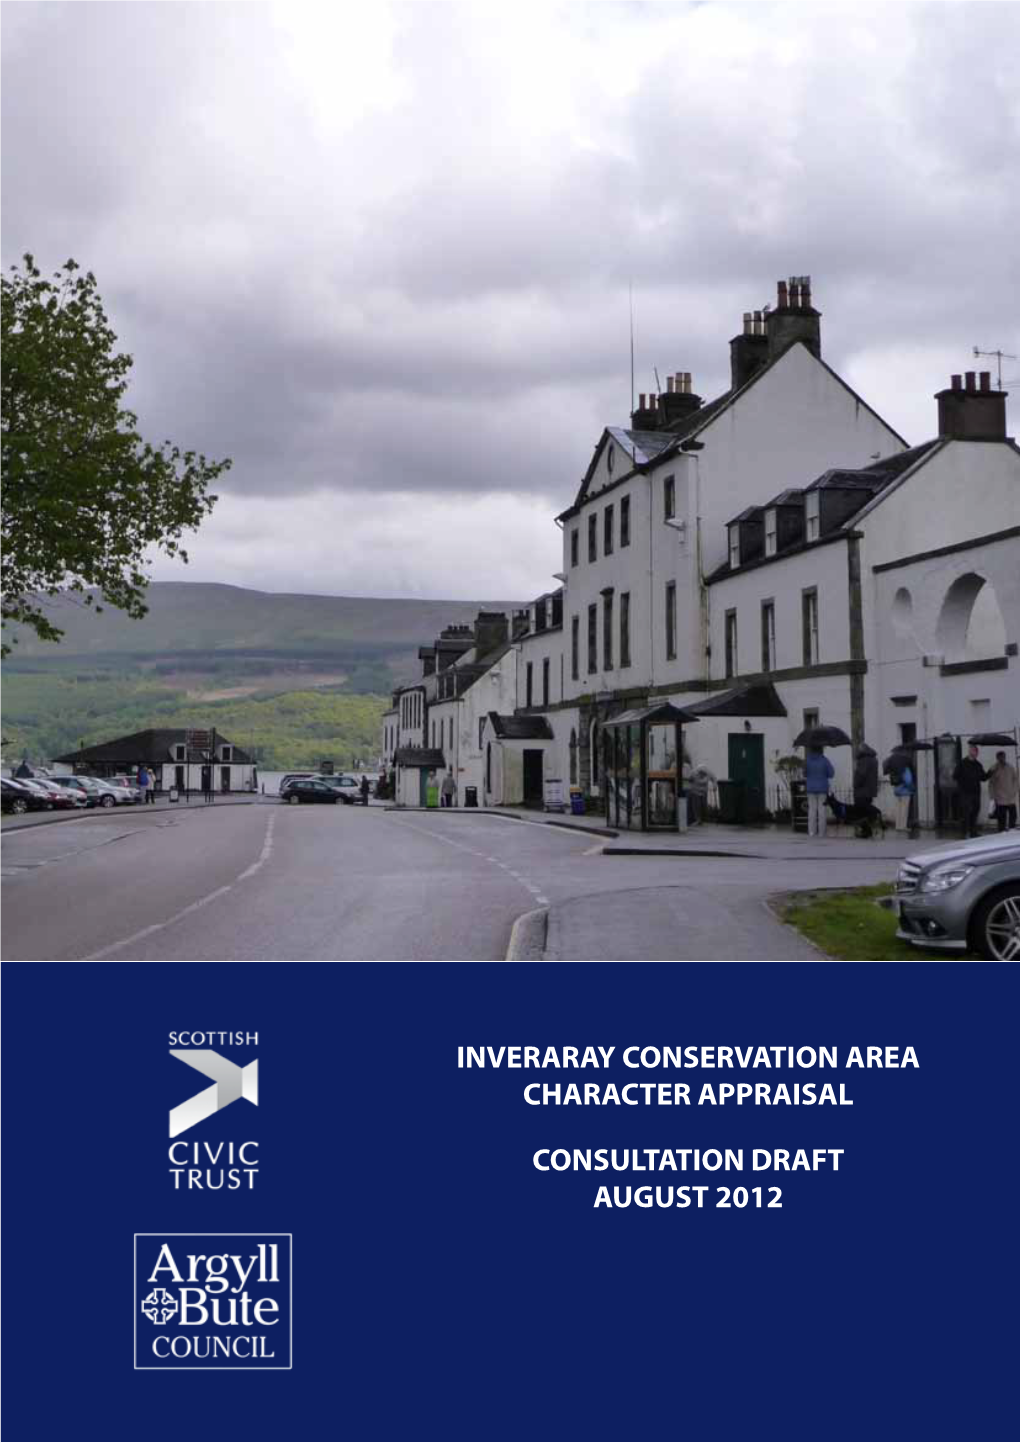 Inveraray Conservation Area Character Appraisal Consultation Draft August 2012